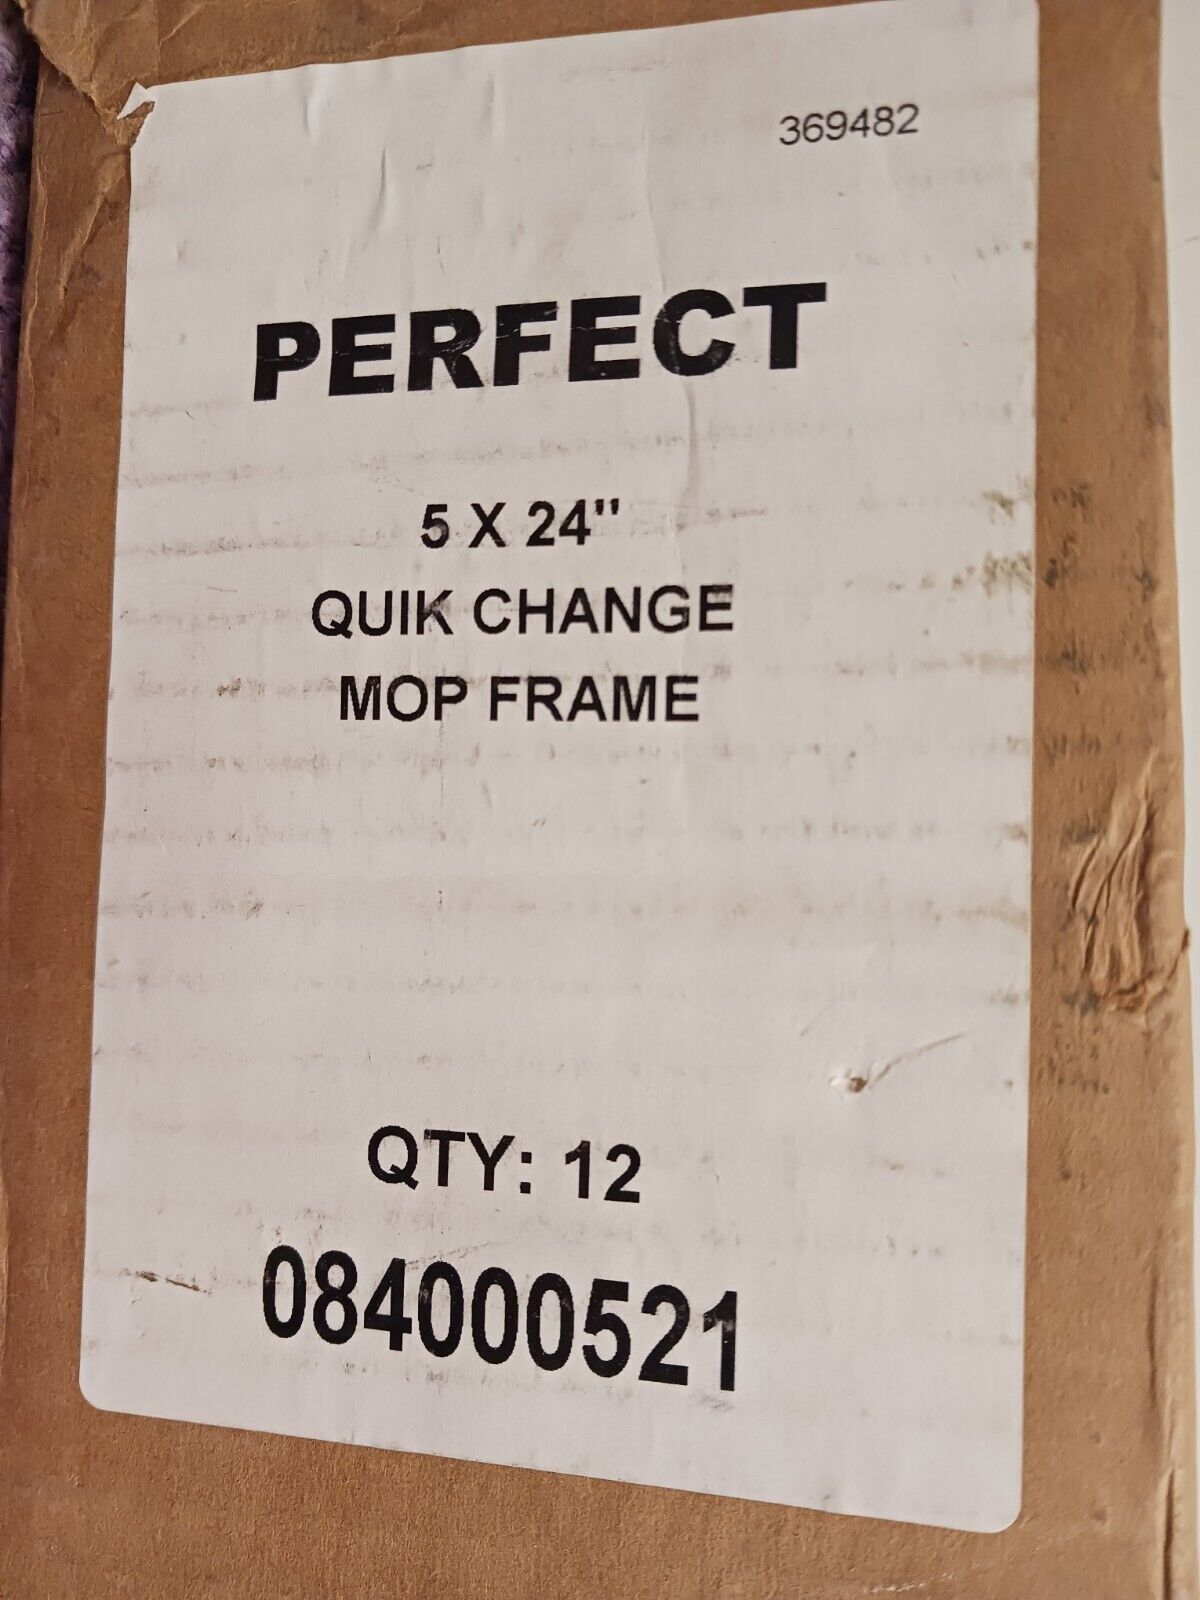 Perfect Quik Change Mop Frame 12 Pack 5 X 24"